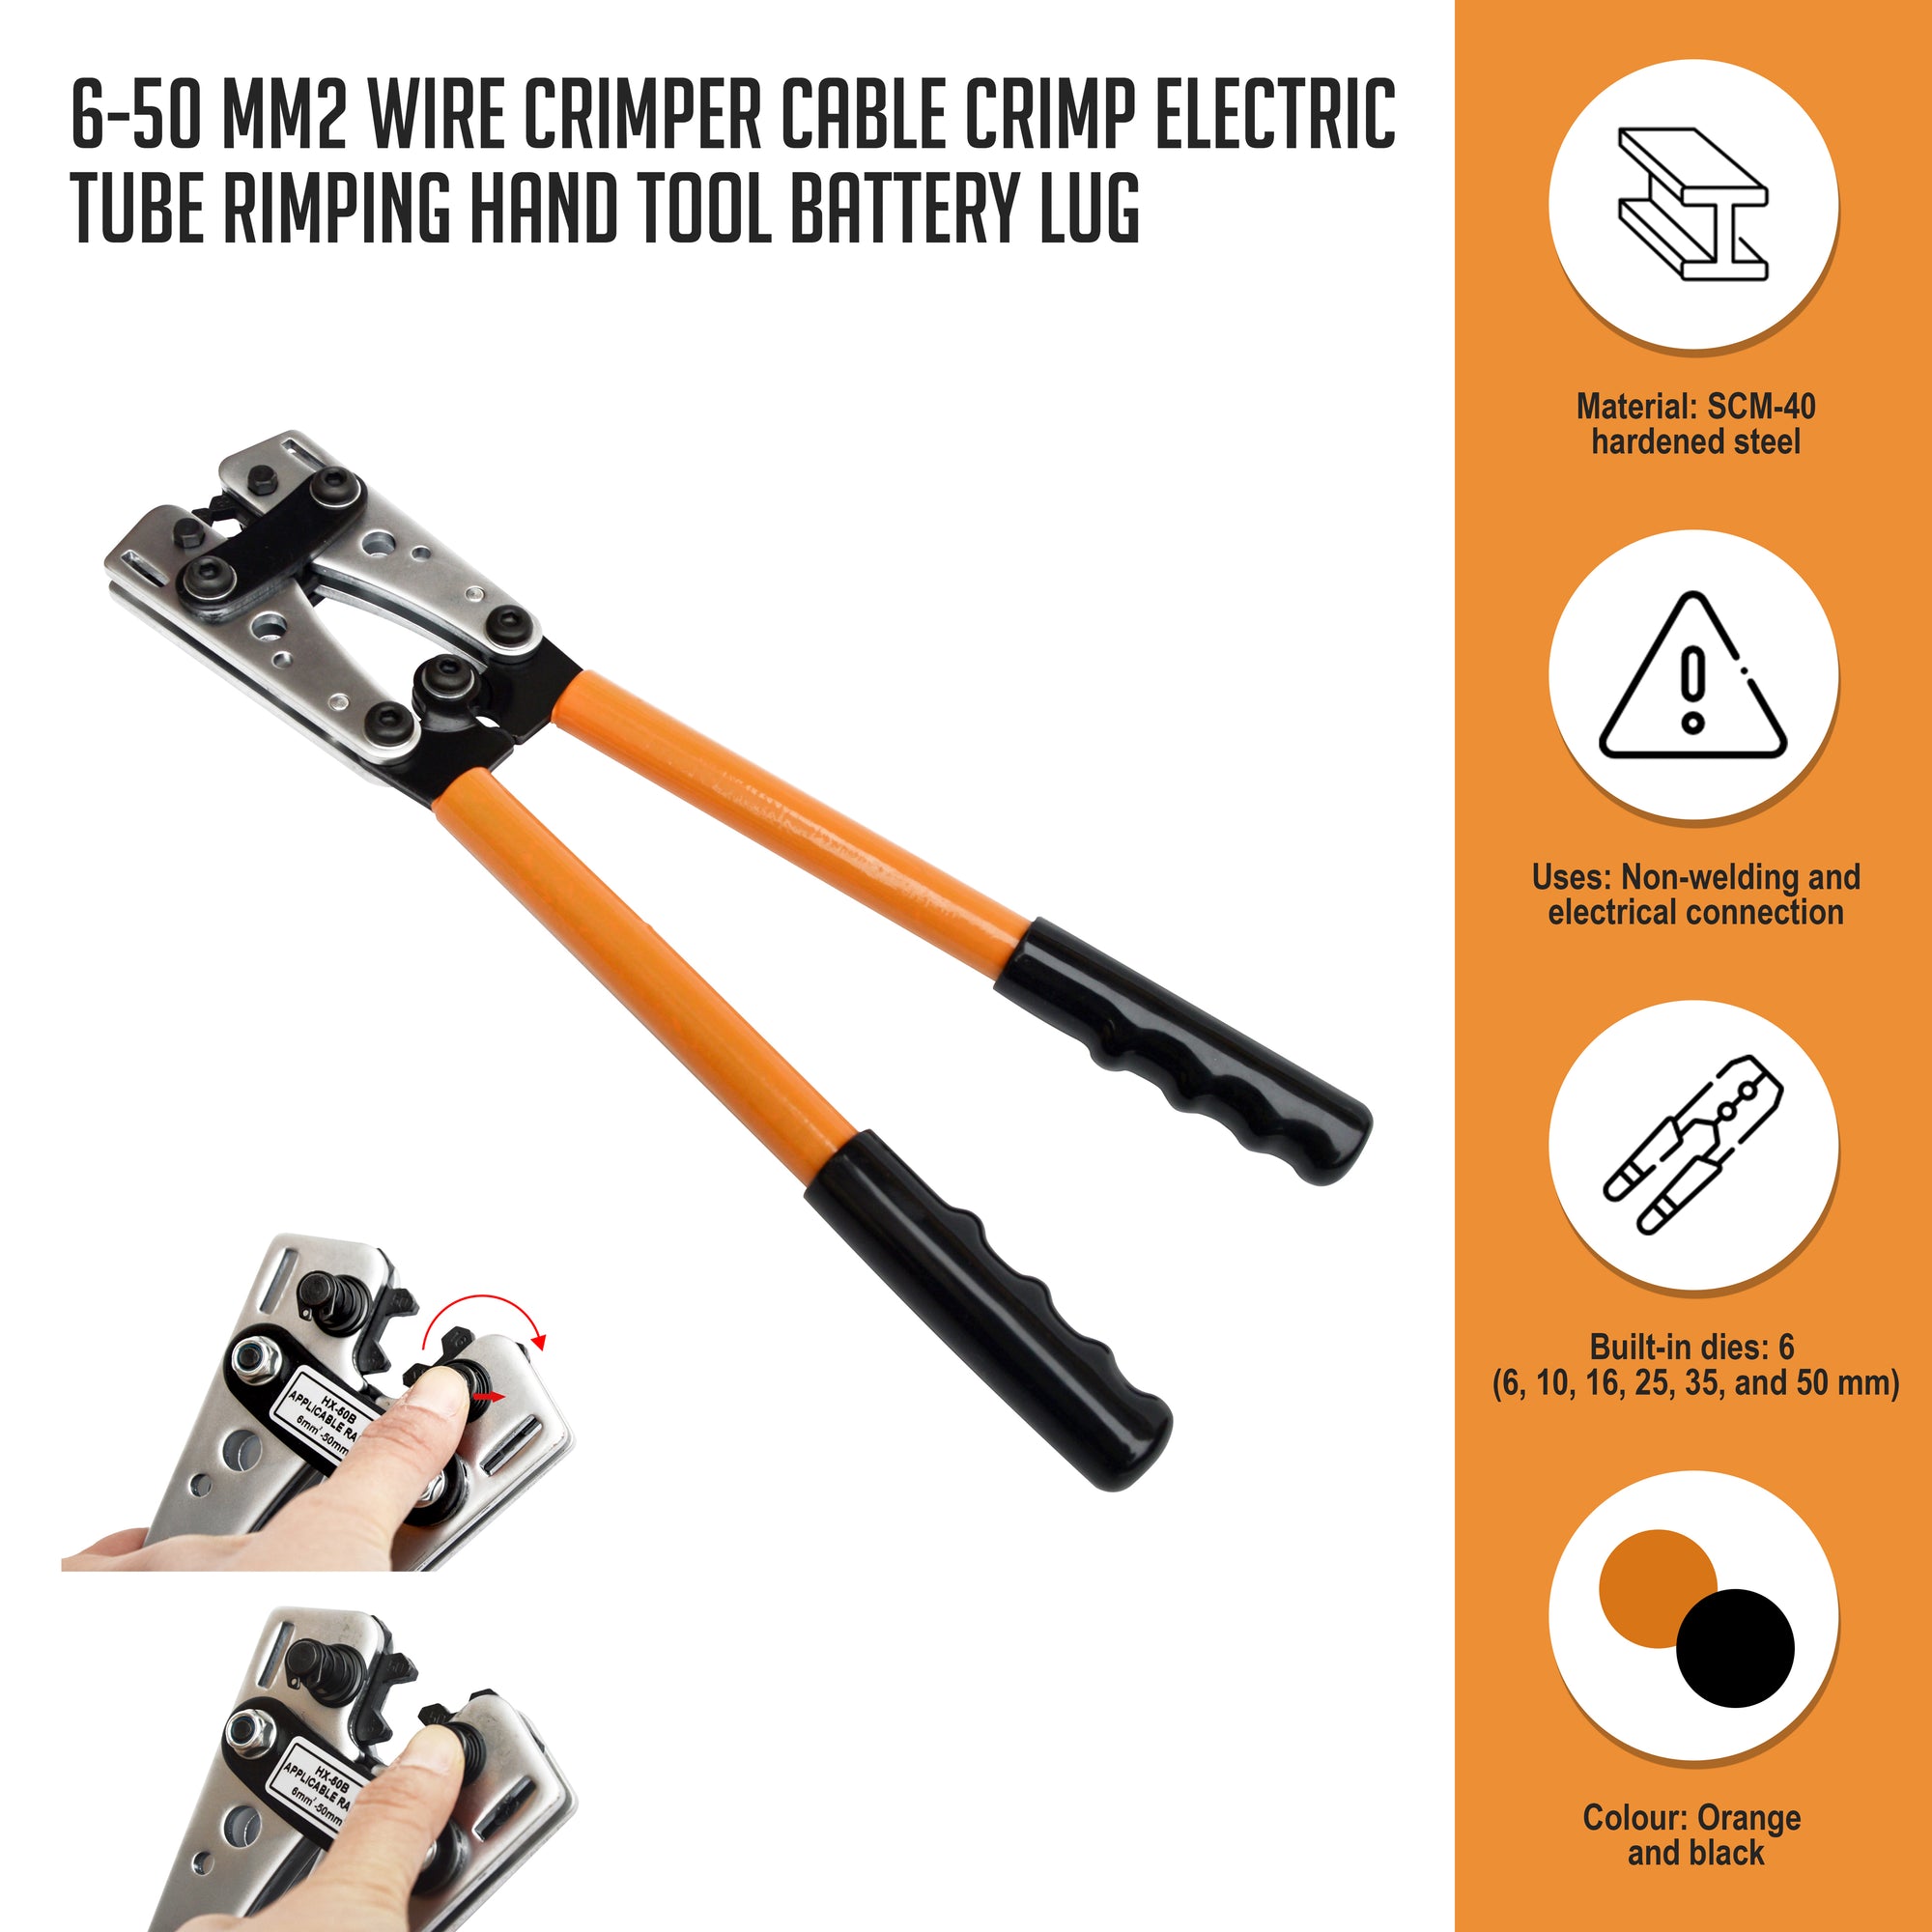 6-50 mm2 Wire Crimper Cable Crimp Electric Tube Crimping Hand Tool Battery Lug